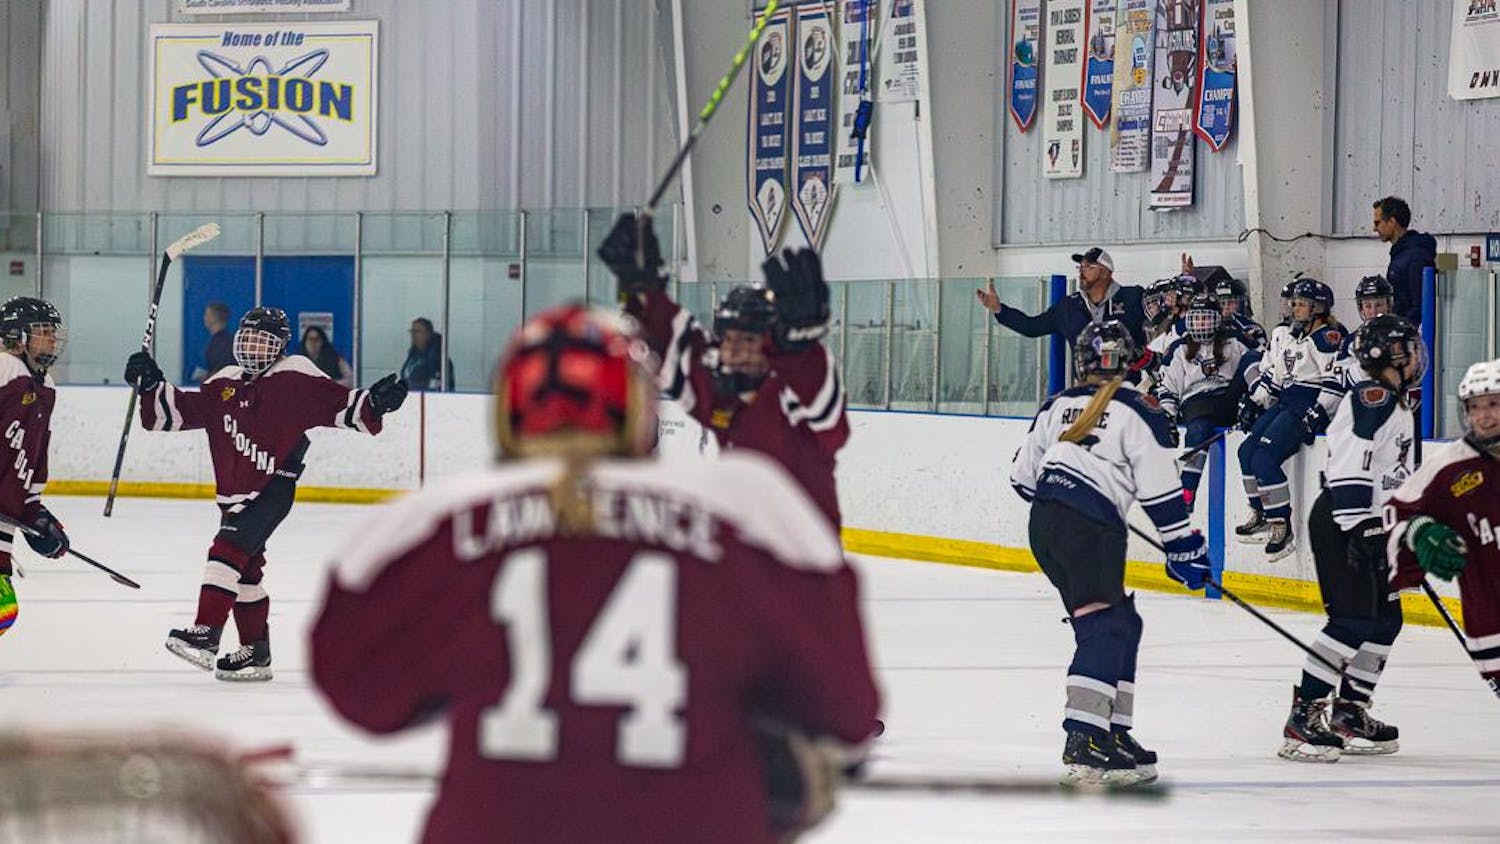 The University of South Carolina's women's hockey team celebrates after its 2-1 victory against the South Carolina Lady Warriors on Oct. 1, 2023, in Irmo, South Carolina. This matchup marks the first women's hockey game at the University of South Carolina in its 222 years of existence.